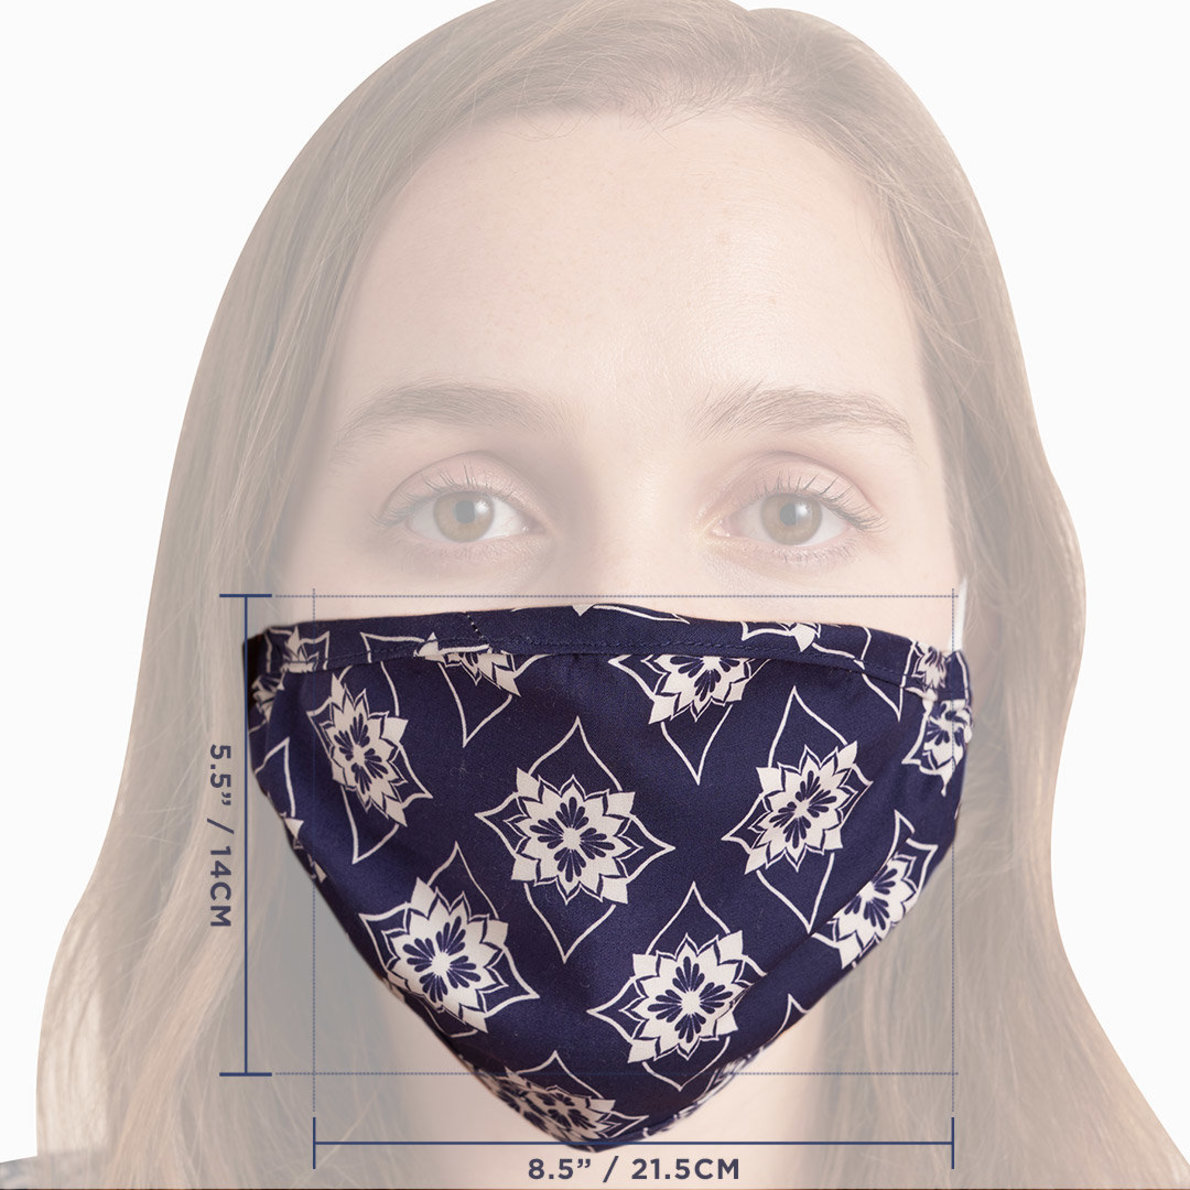 View larger image of Non-Medical Reusable Adult Face Mask - Geometric Flowers